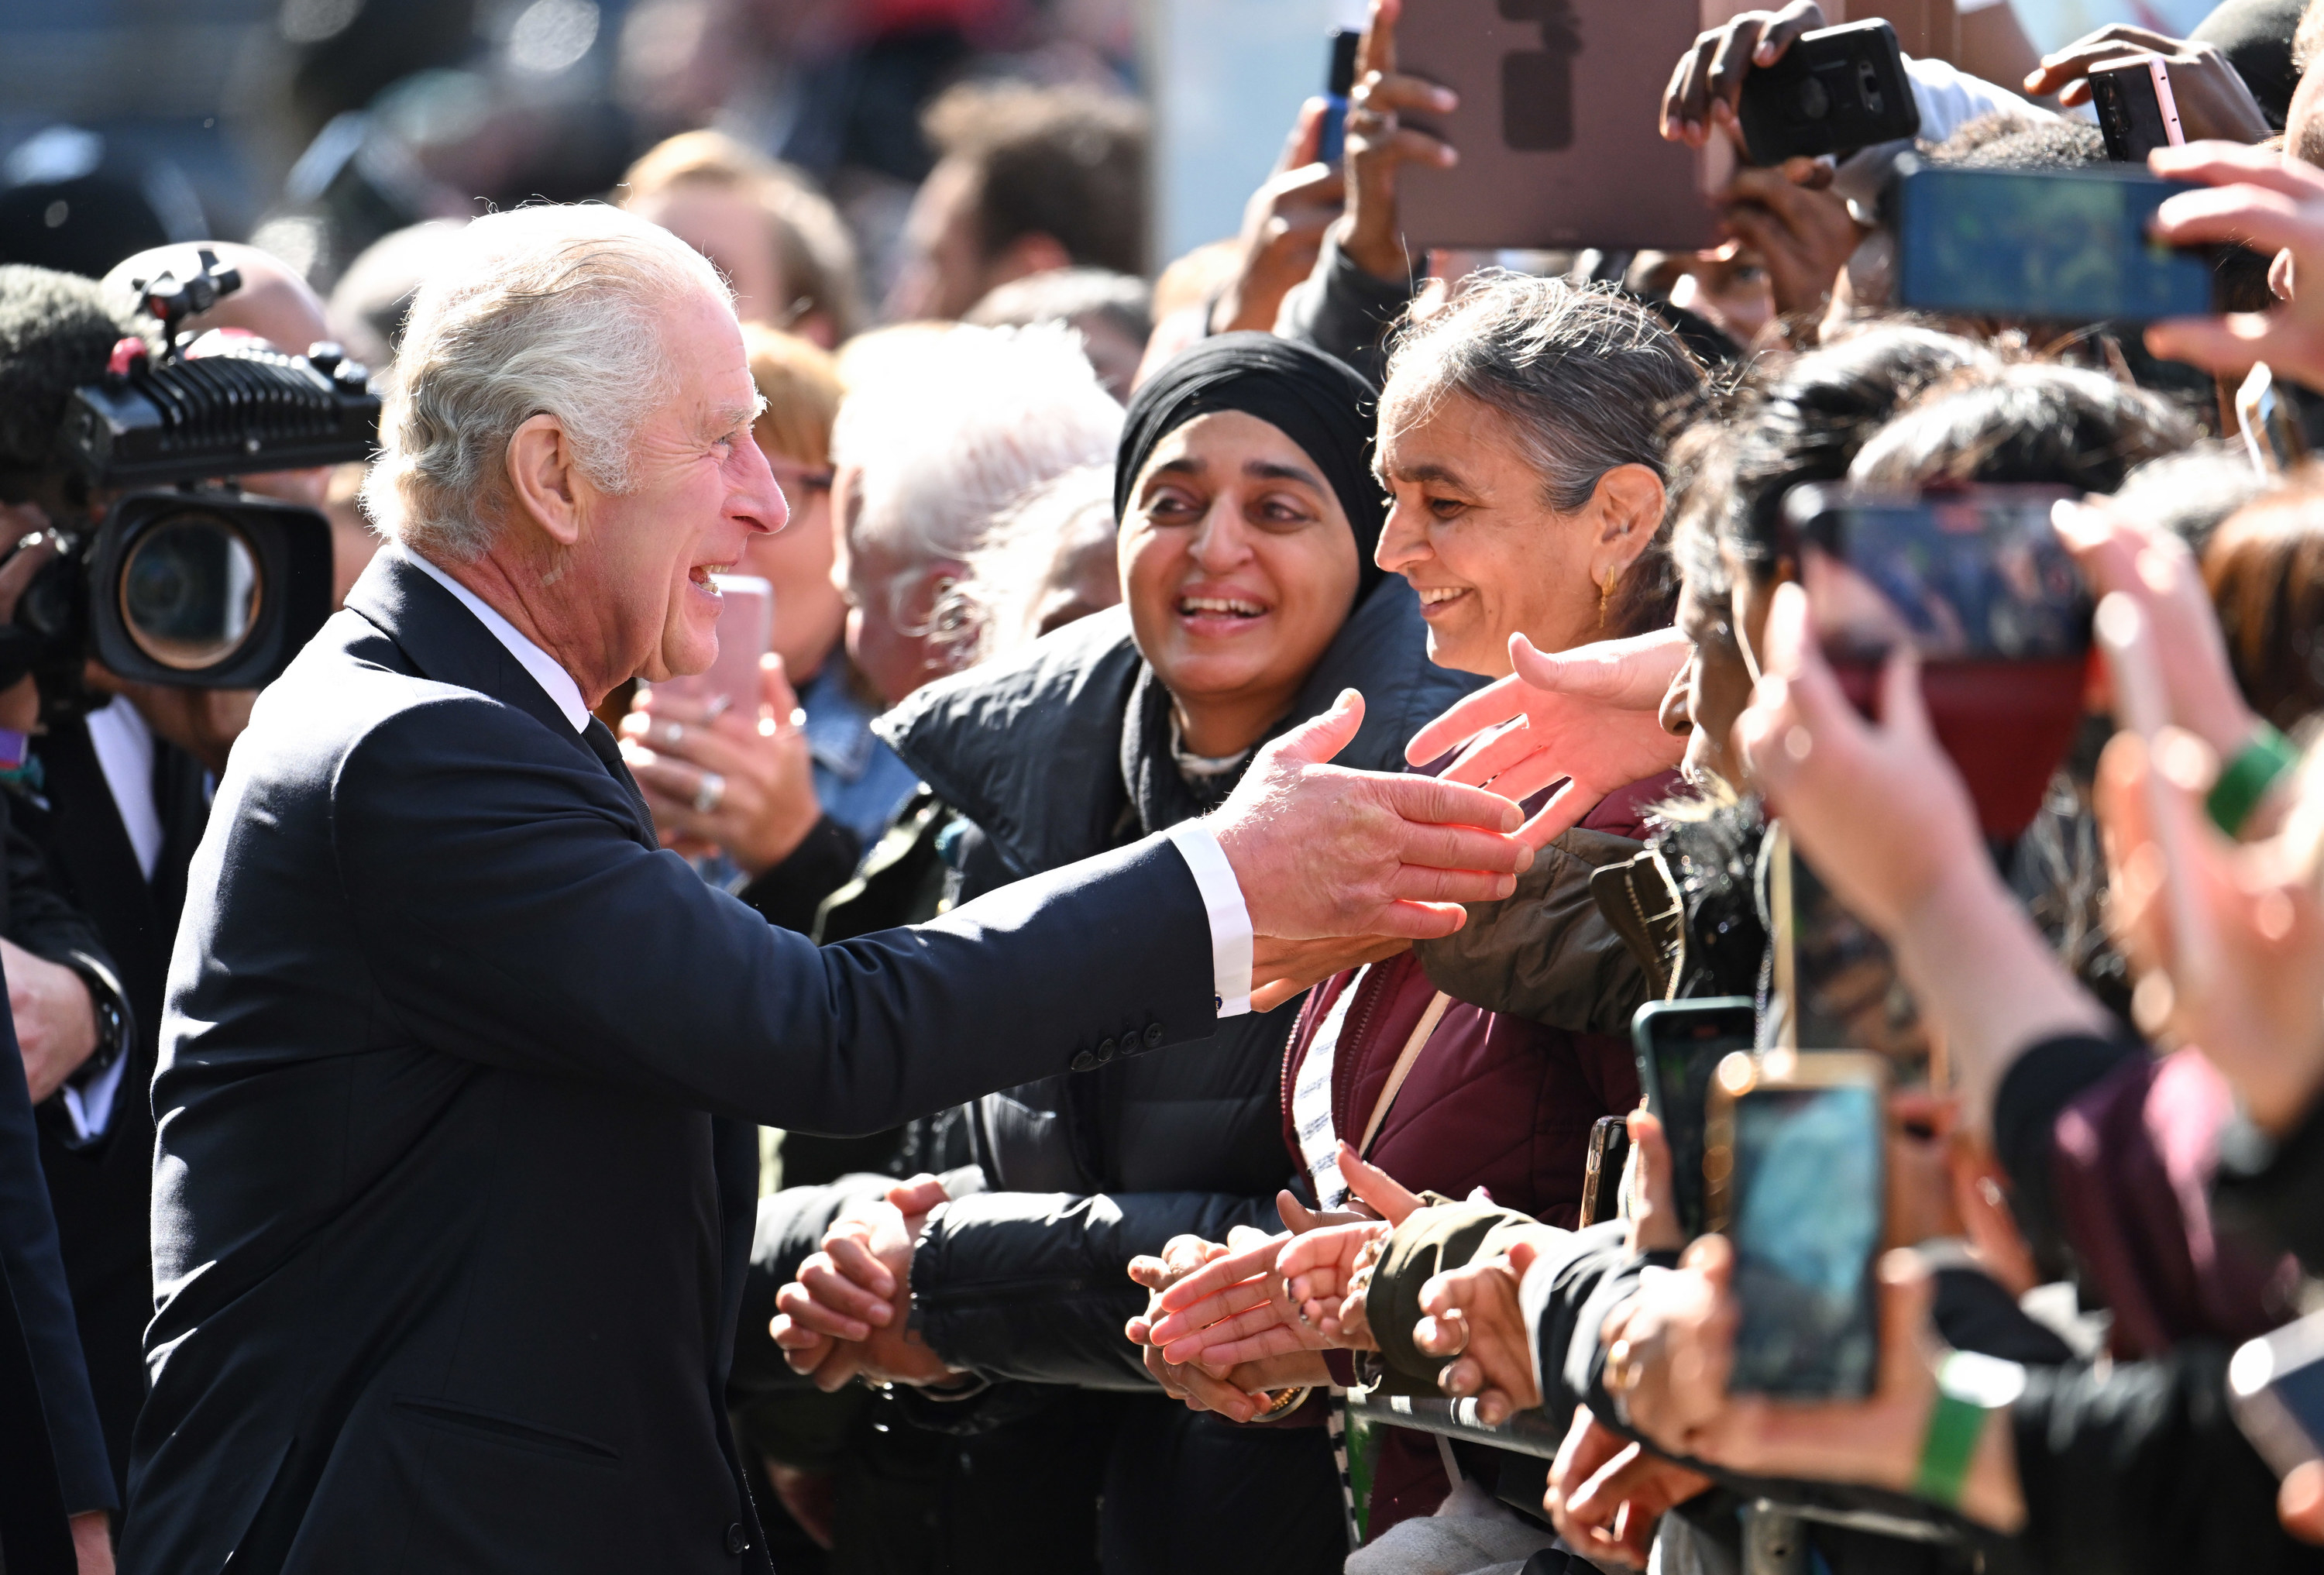 King Charles III greets members of the public queueing along the river Thames.